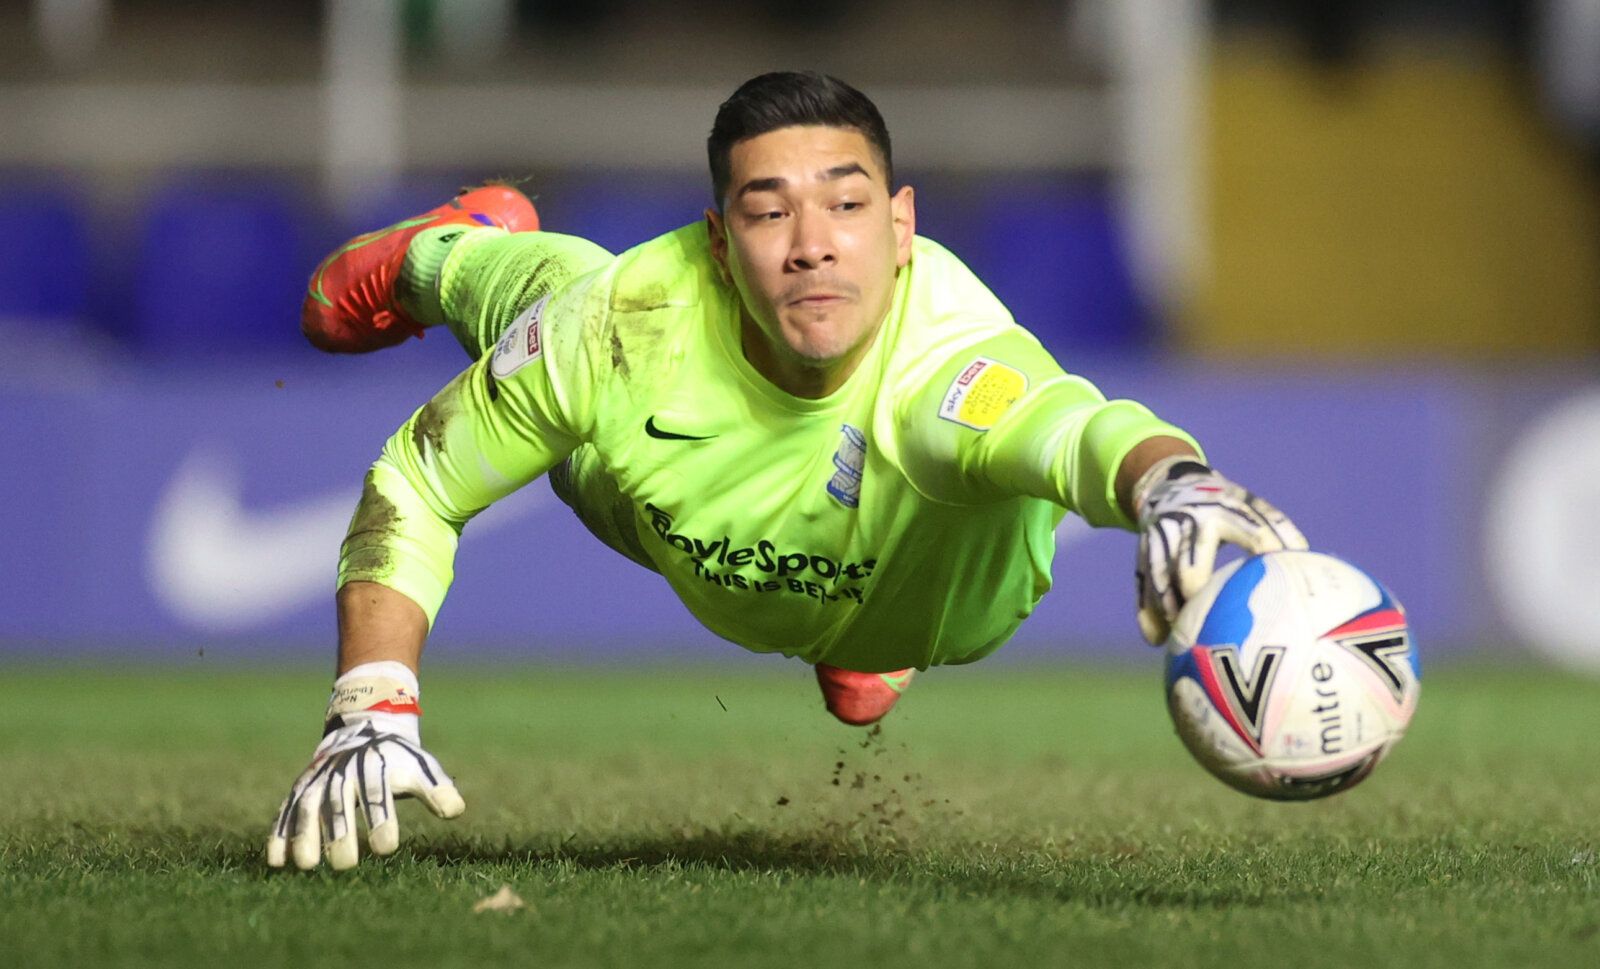 Soccer Football - Championship - Birmingham City v Reading - St Andrew's, Birmingham, Britain - March 17, 2021 Birmingham City’s Neil Etheridge in action Action Images/Carl Recine EDITORIAL USE ONLY. No use with unauthorized audio, video, data, fixture lists, club/league logos or 'live' services. Online in-match use limited to 75 images, no video emulation. No use in betting, games or single club /league/player publications.  Please contact your account representative for further details.